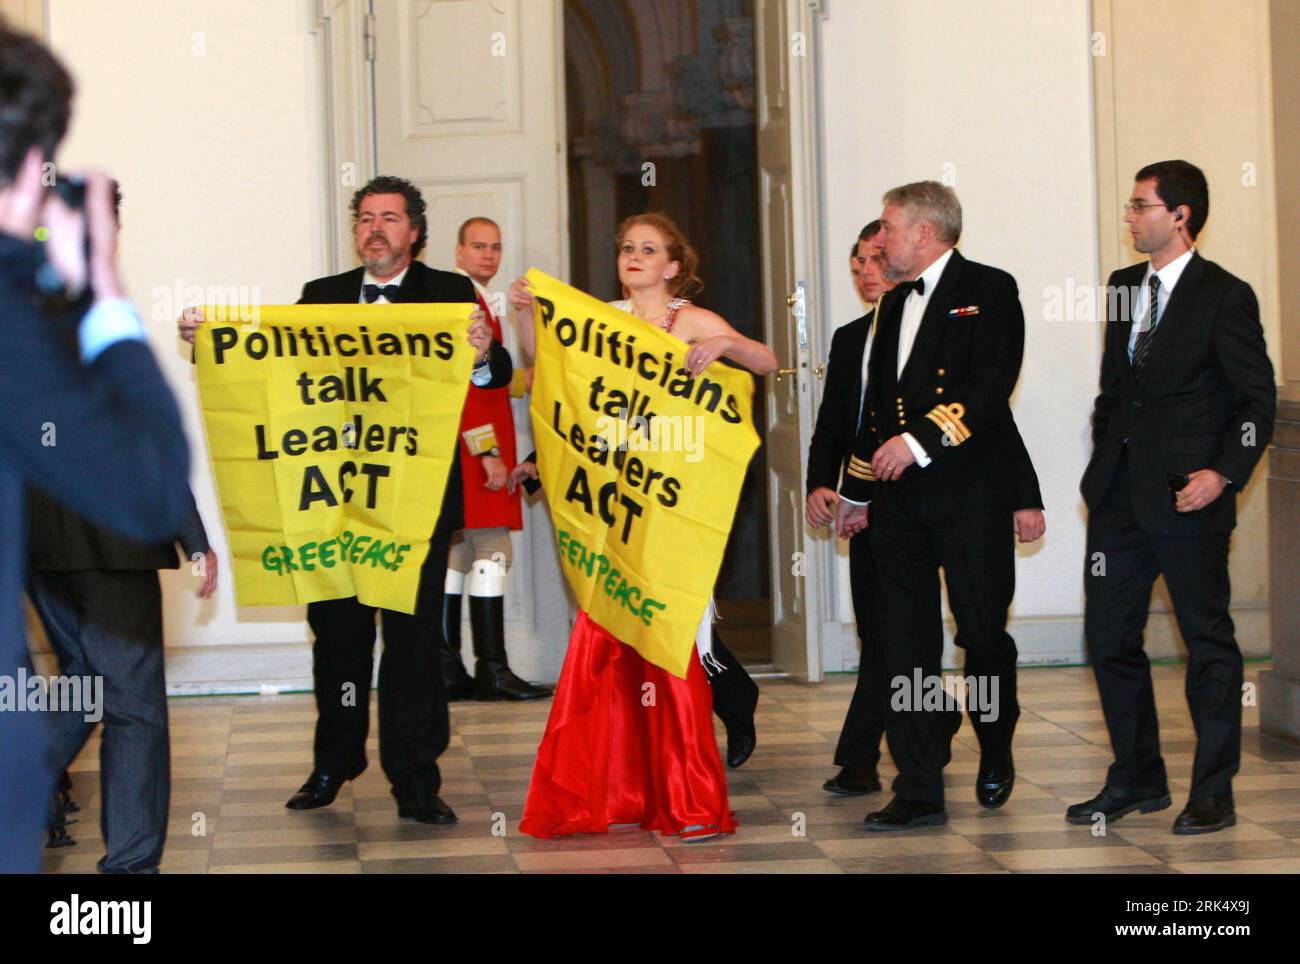 Bildnummer: 53675827  Datum: 17.12.2009  Copyright: imago/Xinhua Greenpeace activists unfold a banner at the dinner hosted by in Copenhagen, Denmark, Dec. 17, 2009. The dinner was held to welcome leaders attending the United Nations Climate Change Conference. (Xinhua/Pang Xinglei)(zl) (1)DENMARK-COPENHAGEN-QUEEN-DINNER-GREENPEACE PUBLICATIONxNOTxINxCHN Politik Klimagipfel Weltklimagipfel Kopenhagen Demo Protest premiumd kbdig xng 2009 quer    Bildnummer 53675827 Date 17 12 2009 Copyright Imago XINHUA Greenpeace activists unfold a Banner AT The Dinner hosted by in Copenhagen Denmark DEC 17 2009 Stock Photo